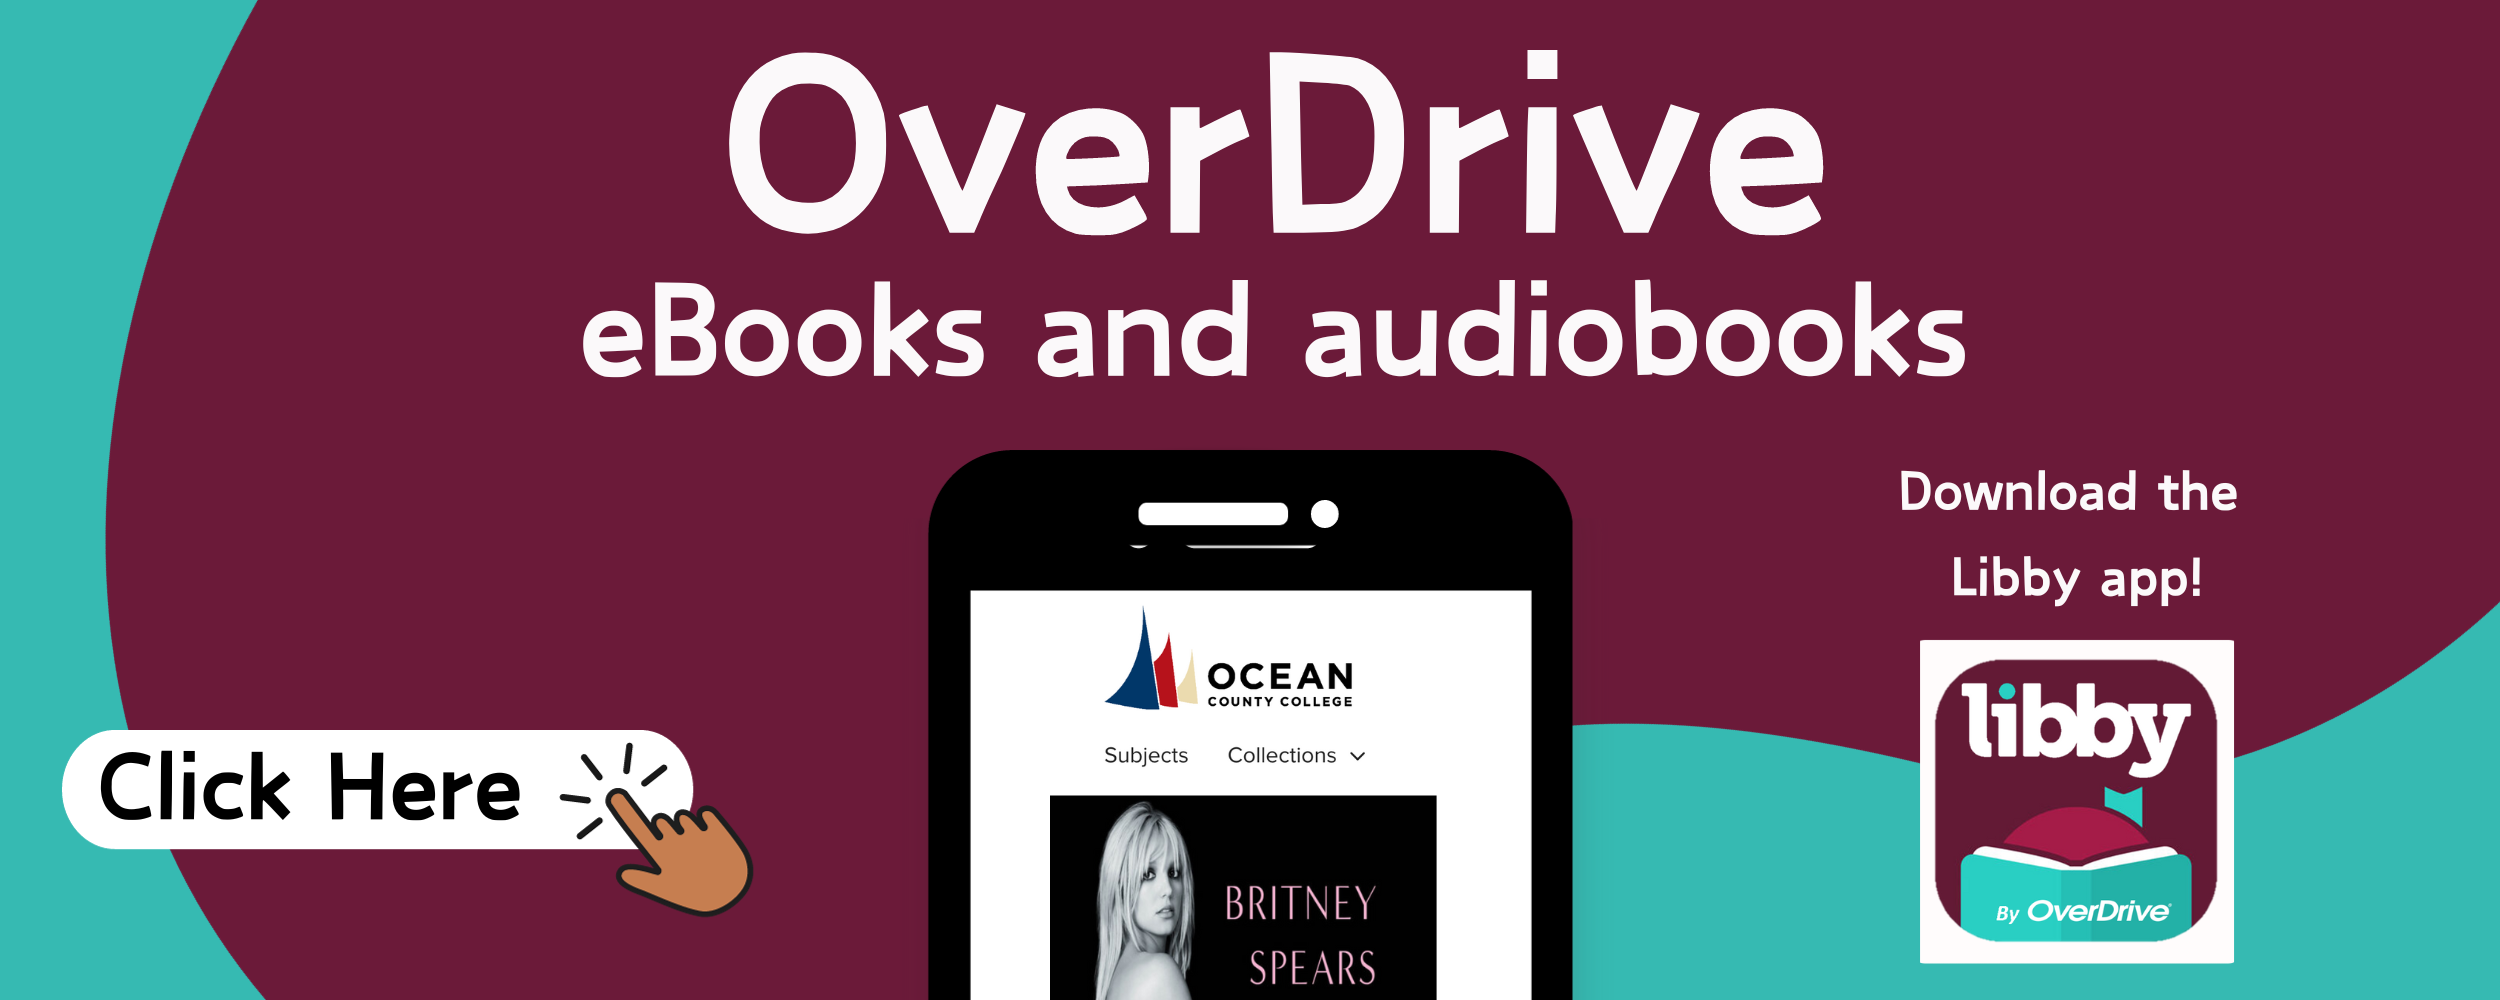 Overdrive eBooks and Audiobooks - Download the Libby app